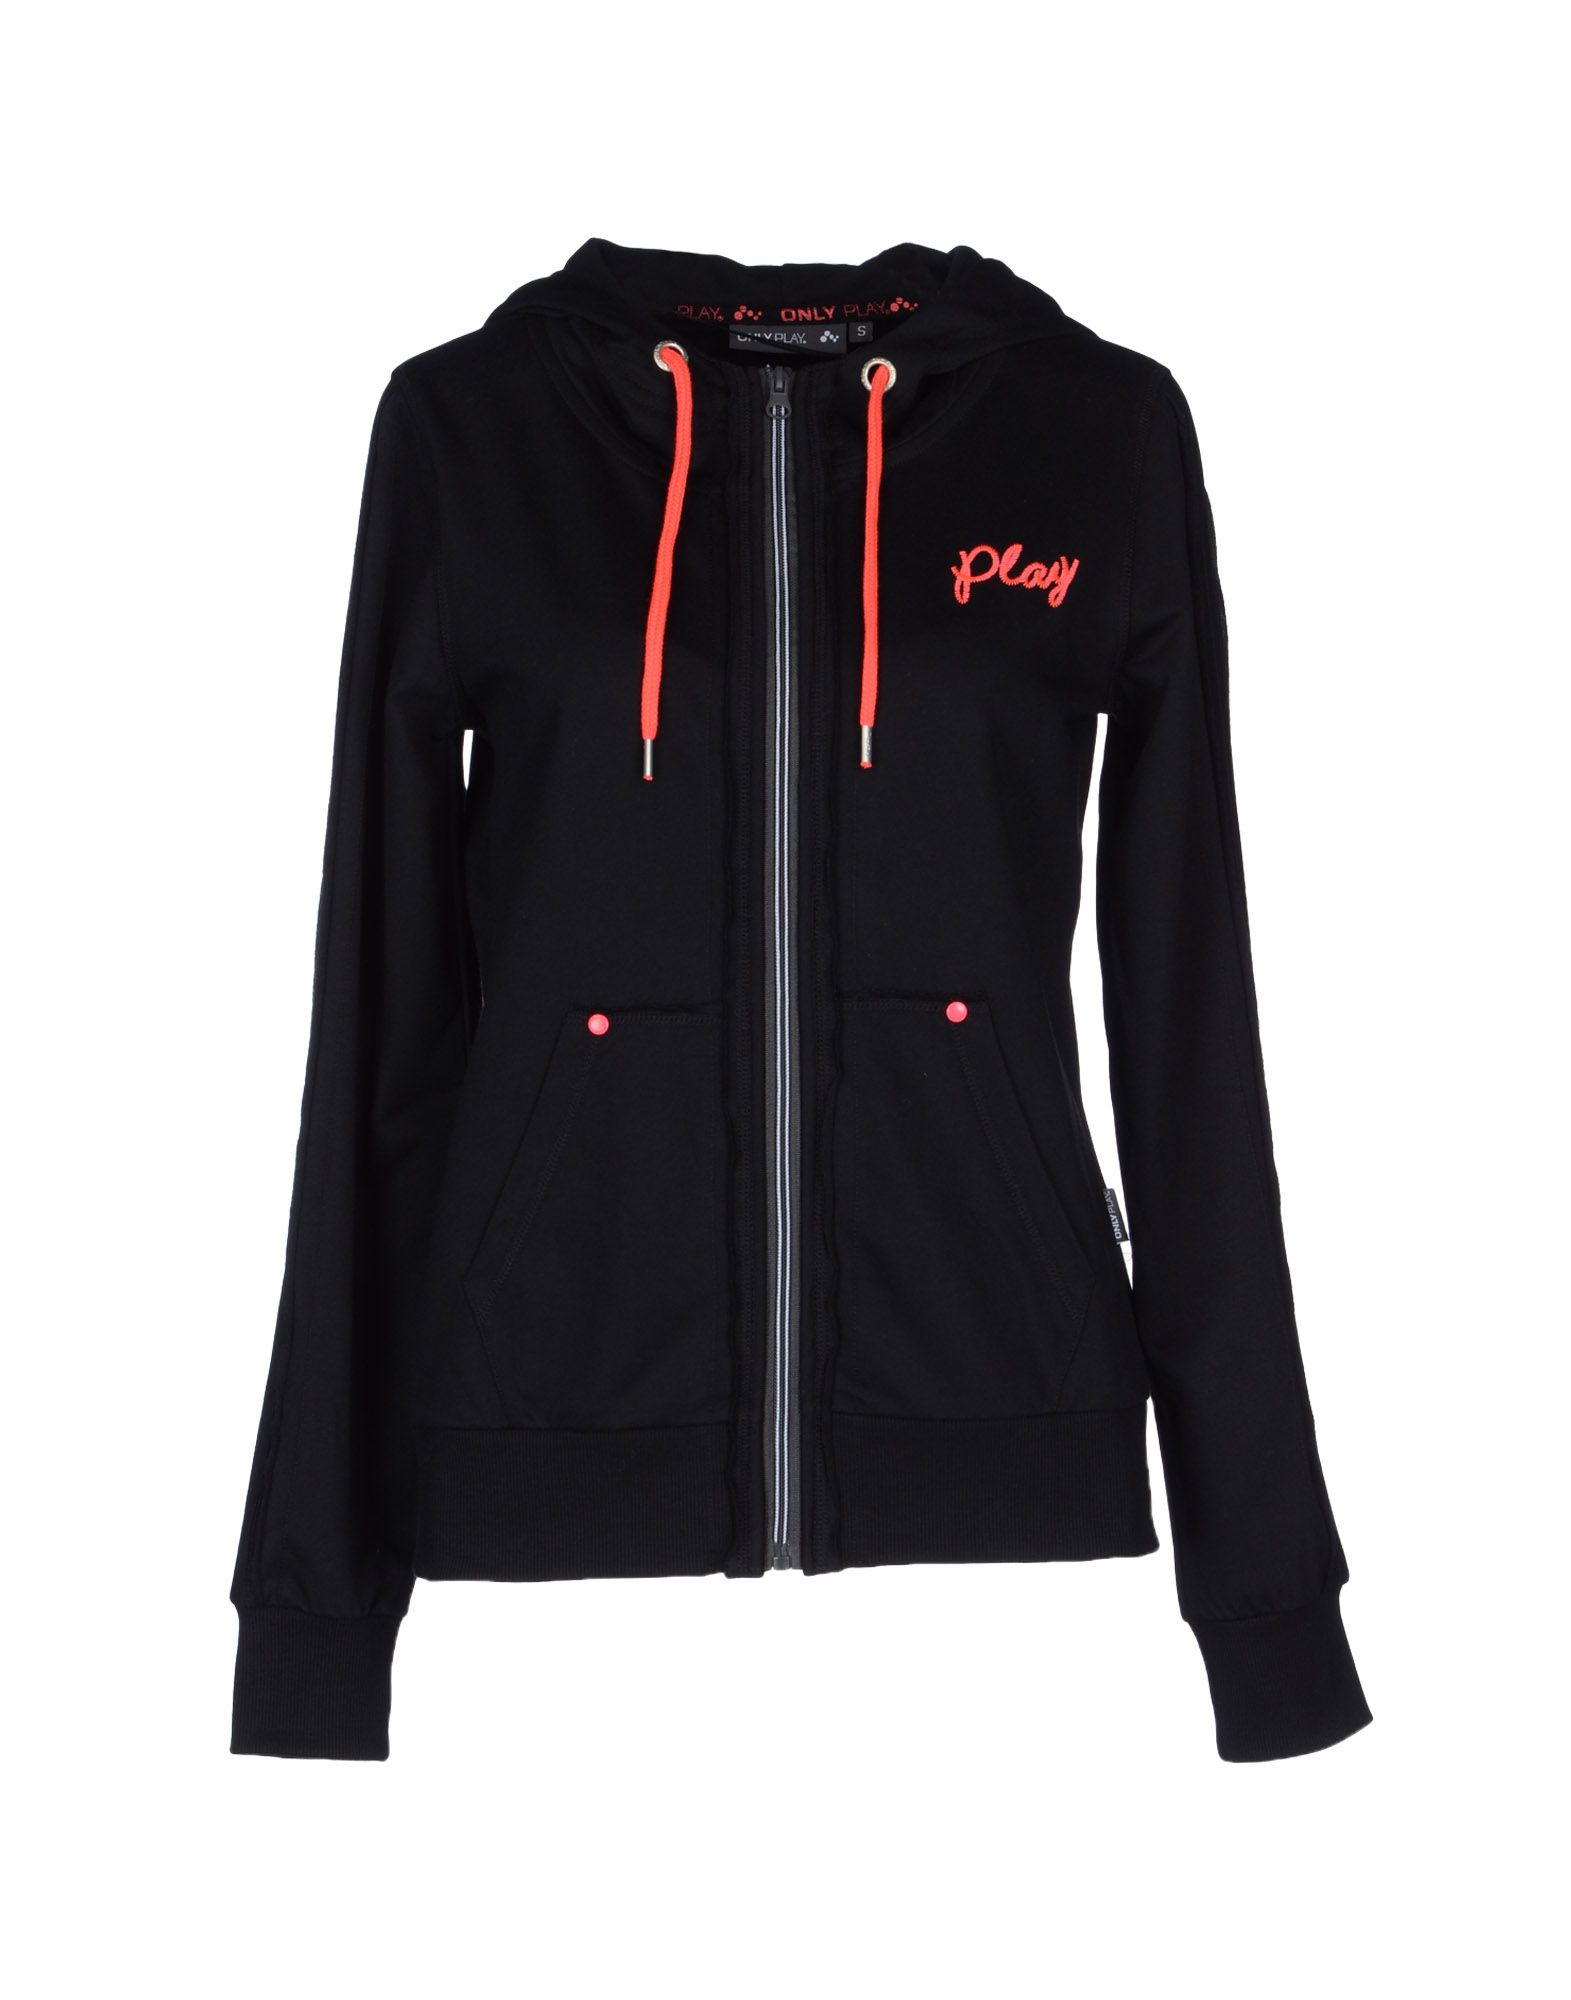 Foto Only Play Sudaderas Con Capucha Mujer Negro